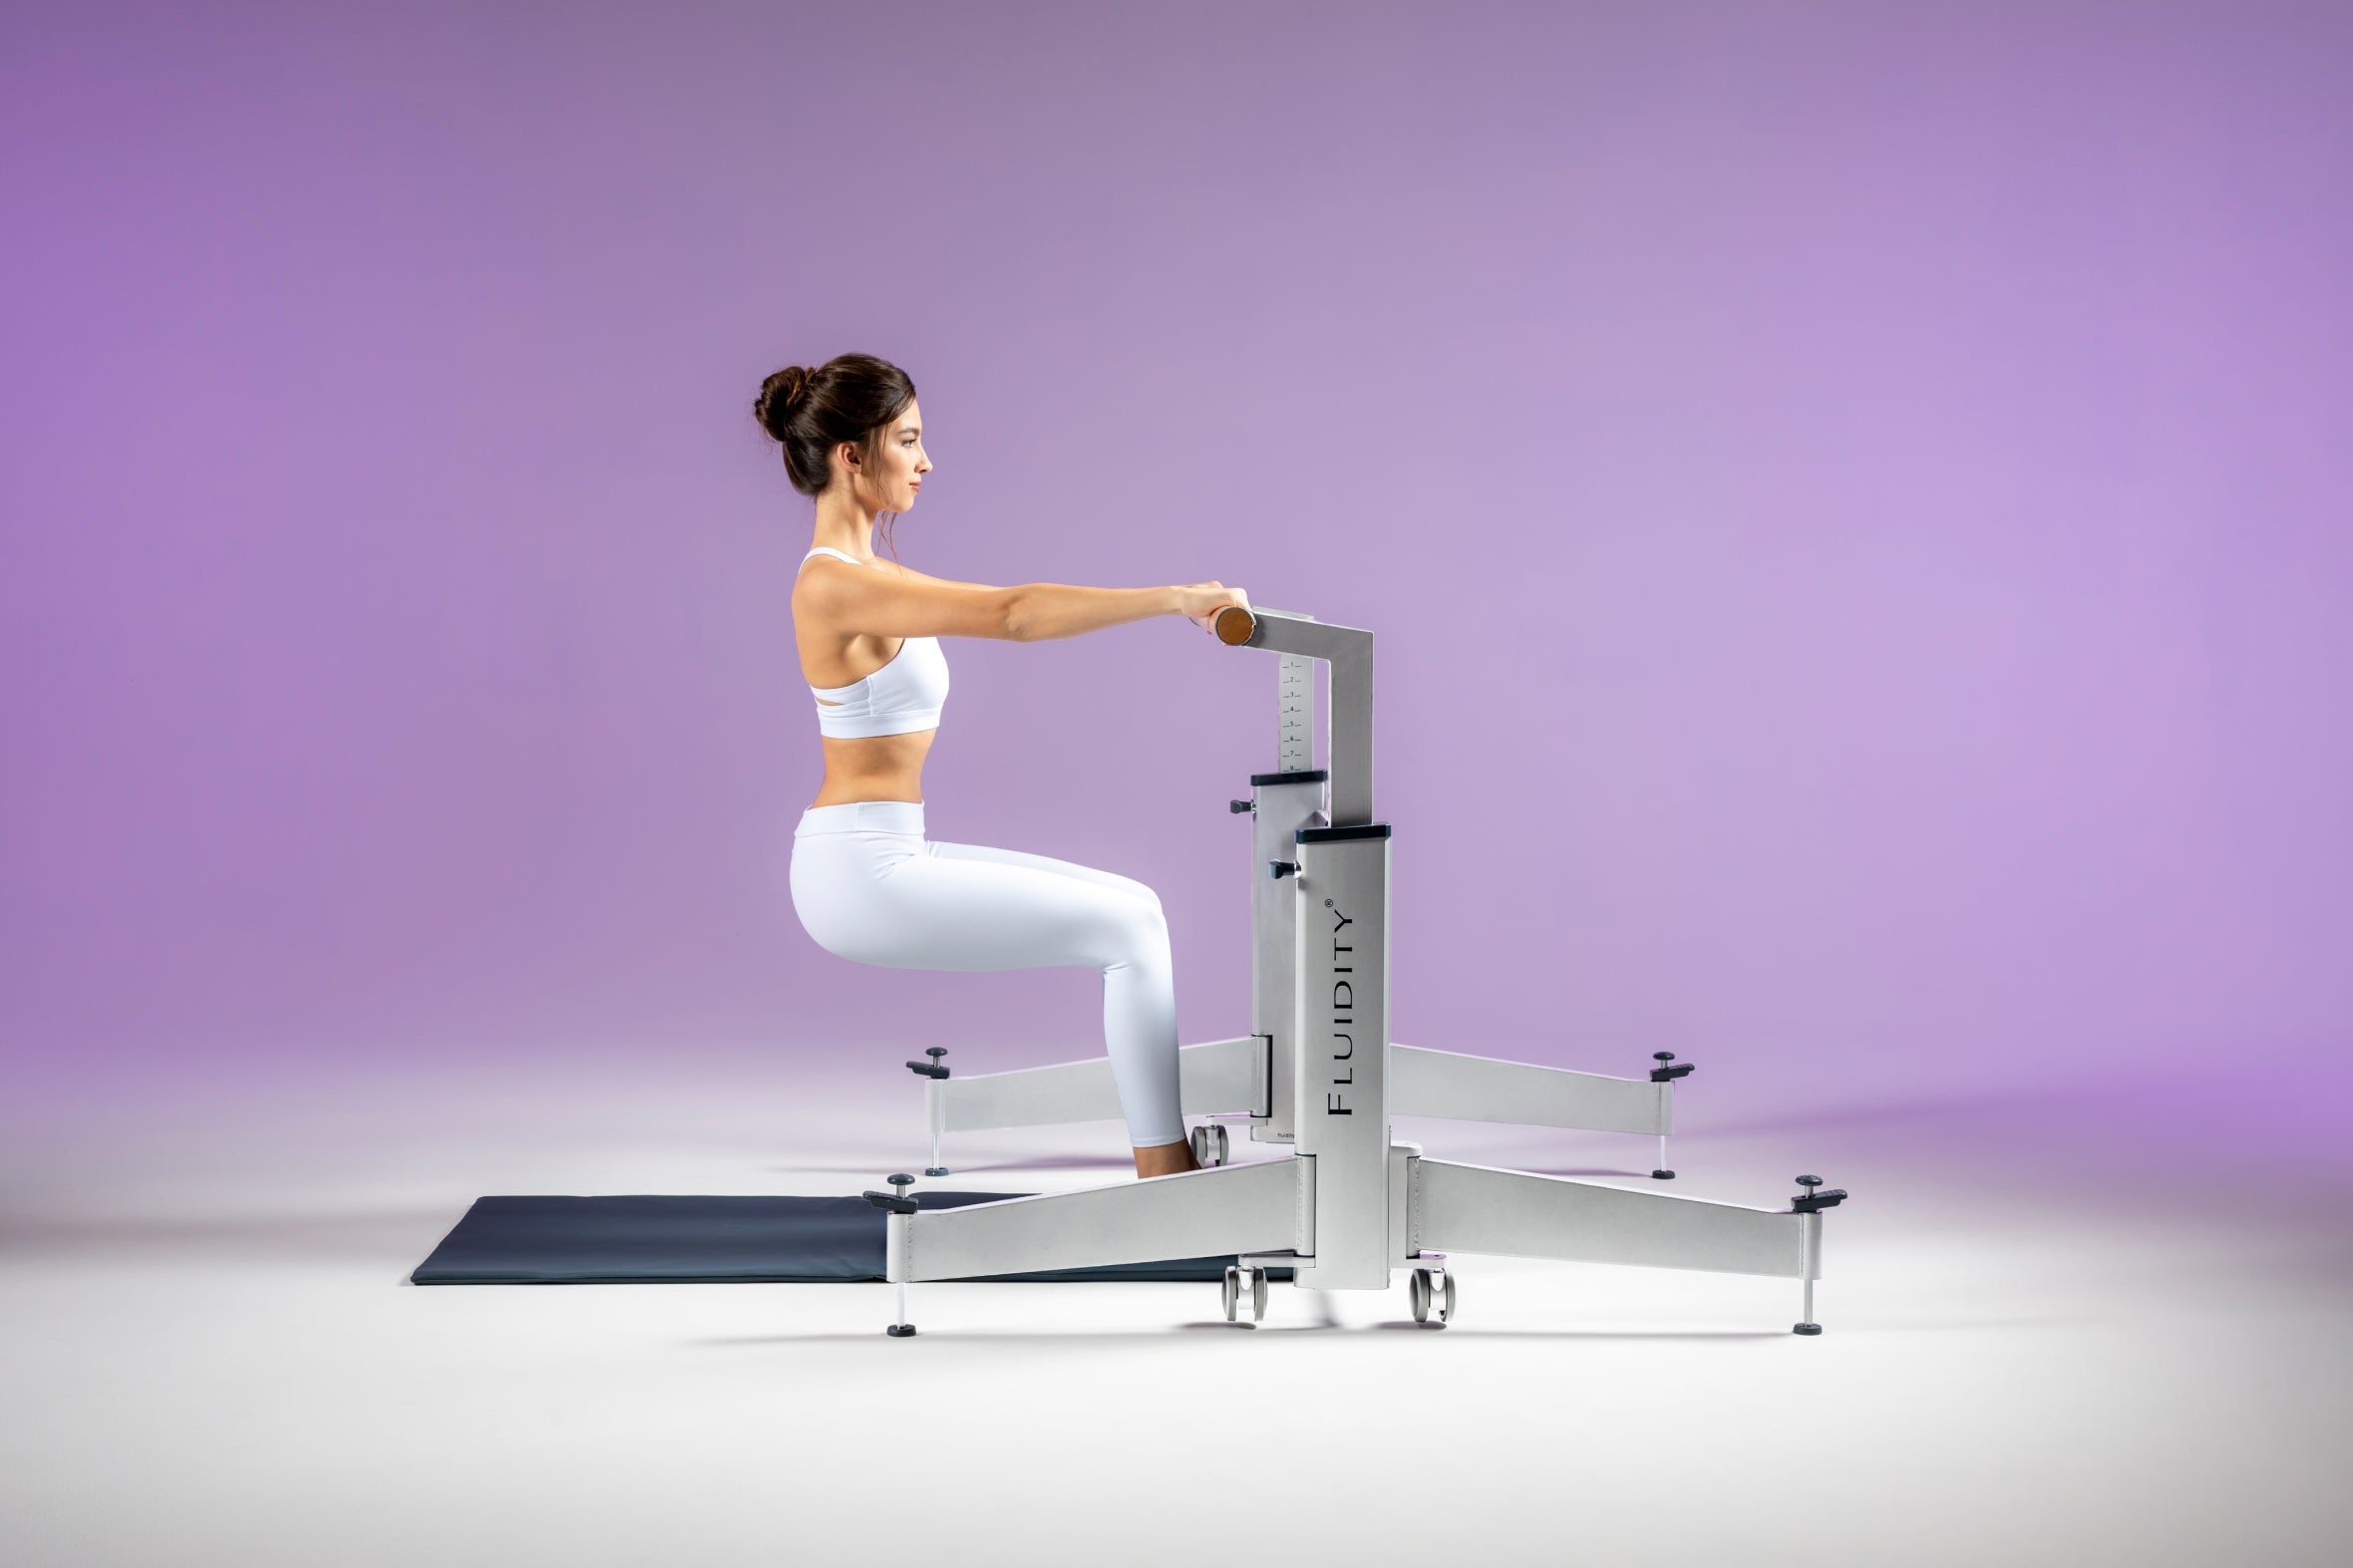 The Ultimate Fluidity Barre System  Fluidity bar, Fluidity workout, Bar  workout